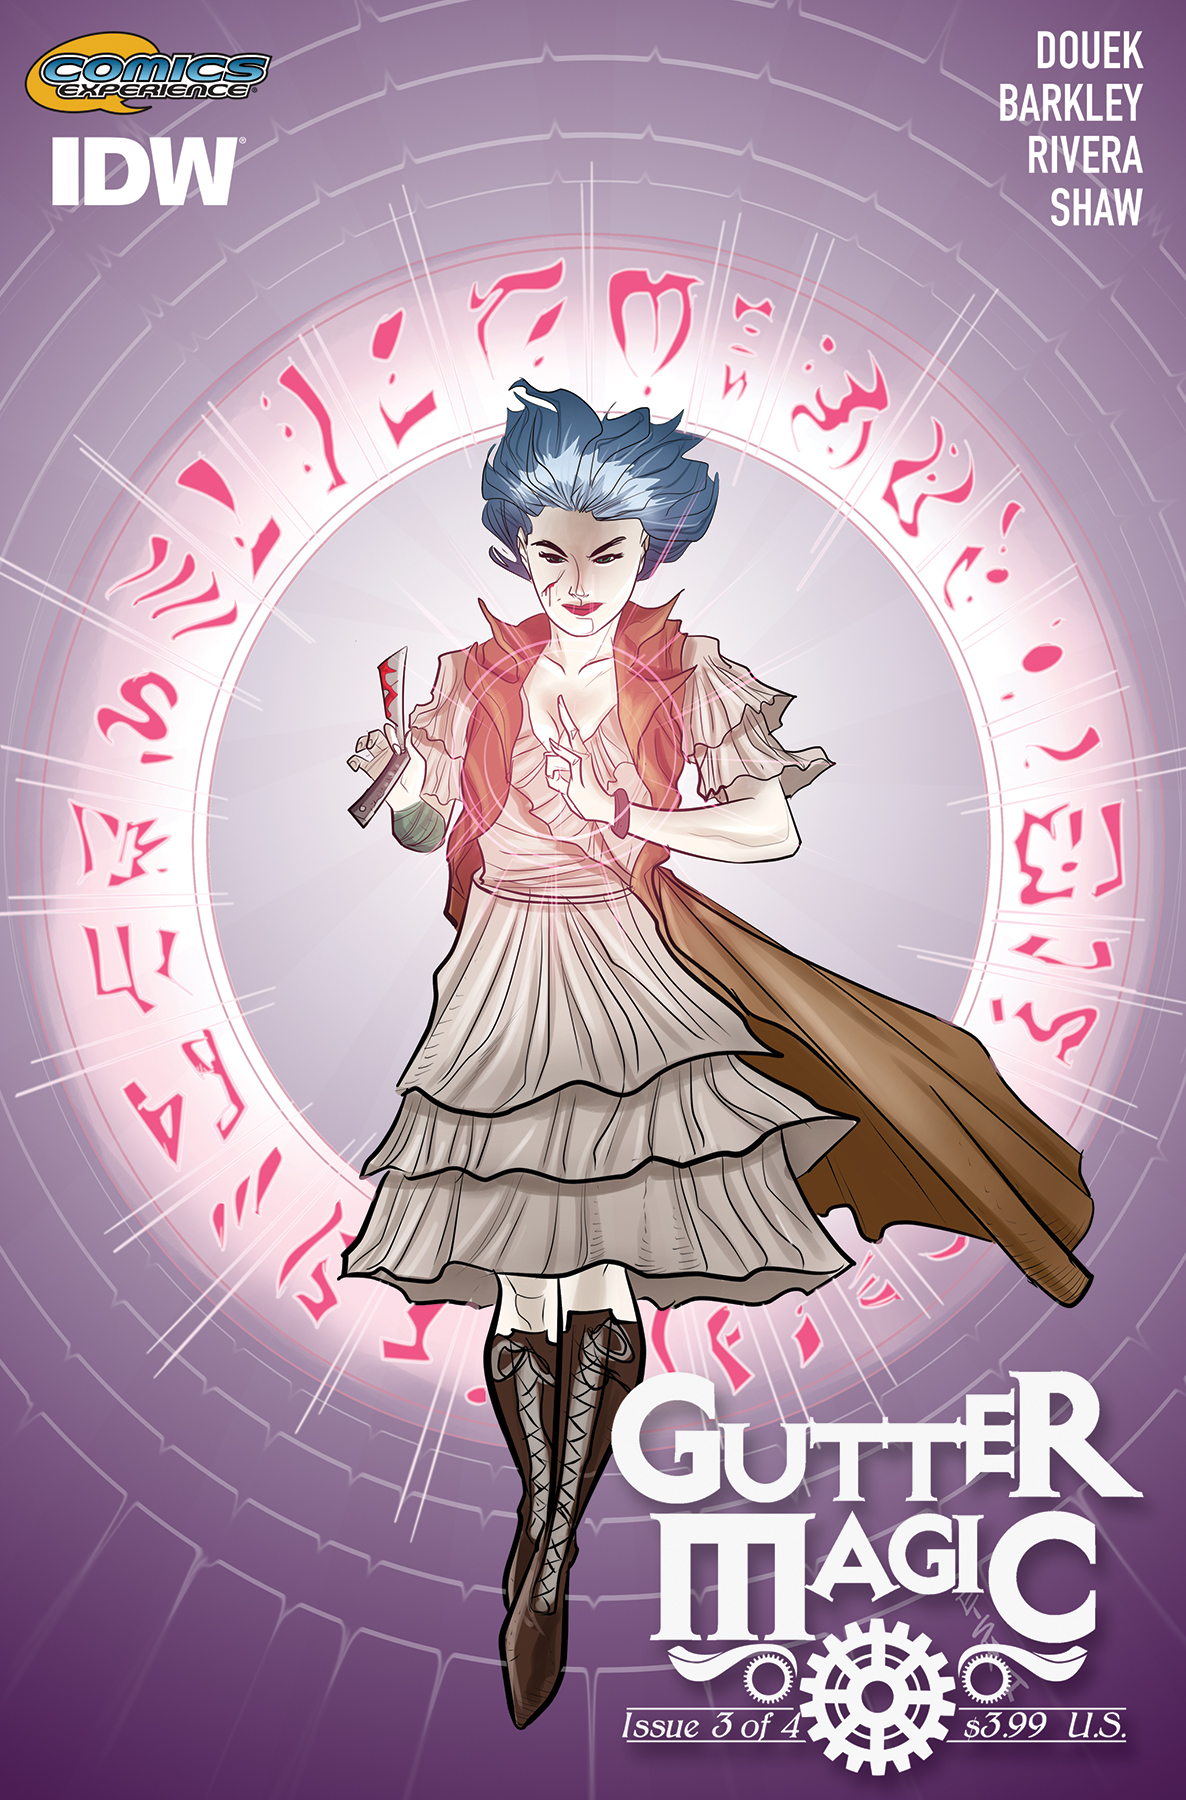 Gutter Magic #3 (of 4) Cover